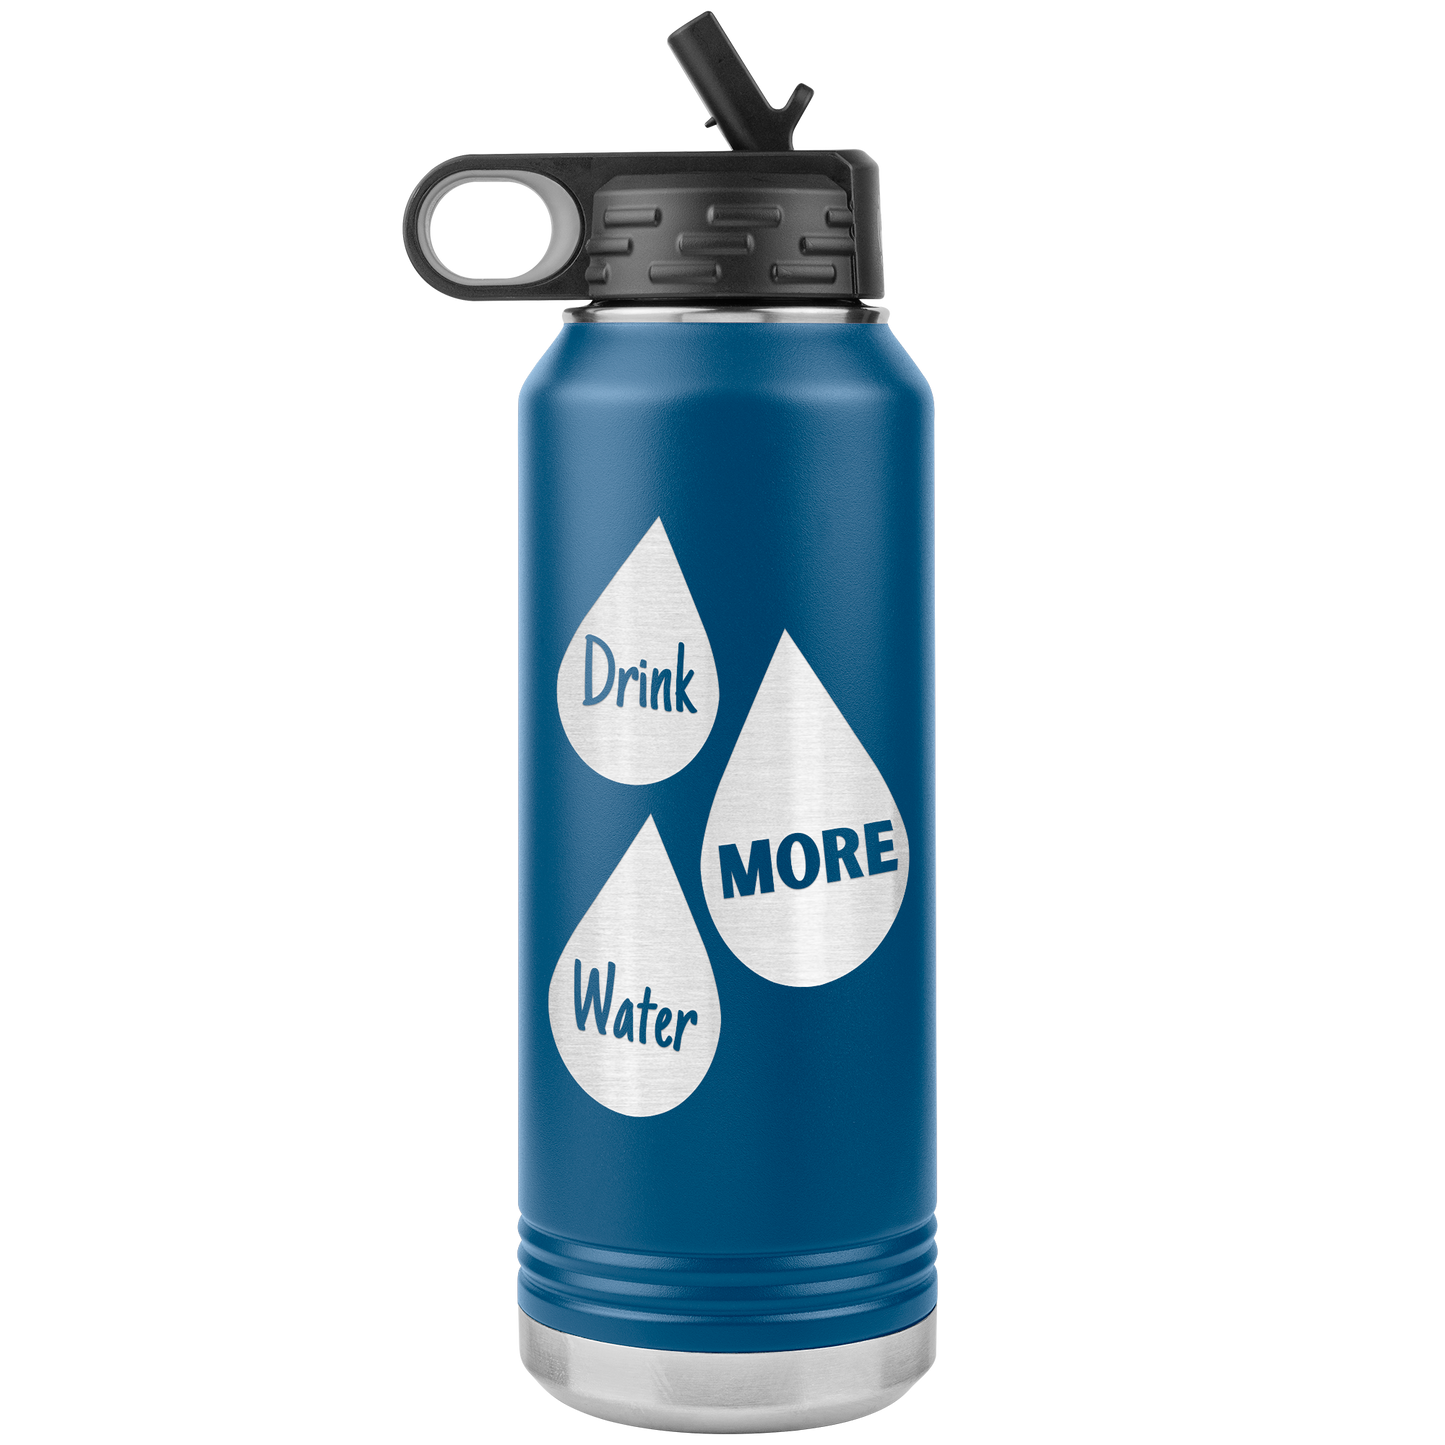 "Drink More Water" 32 oz. Insulated Stainless Steel Water Bottle with Flip Top Lid & Built-in Straw